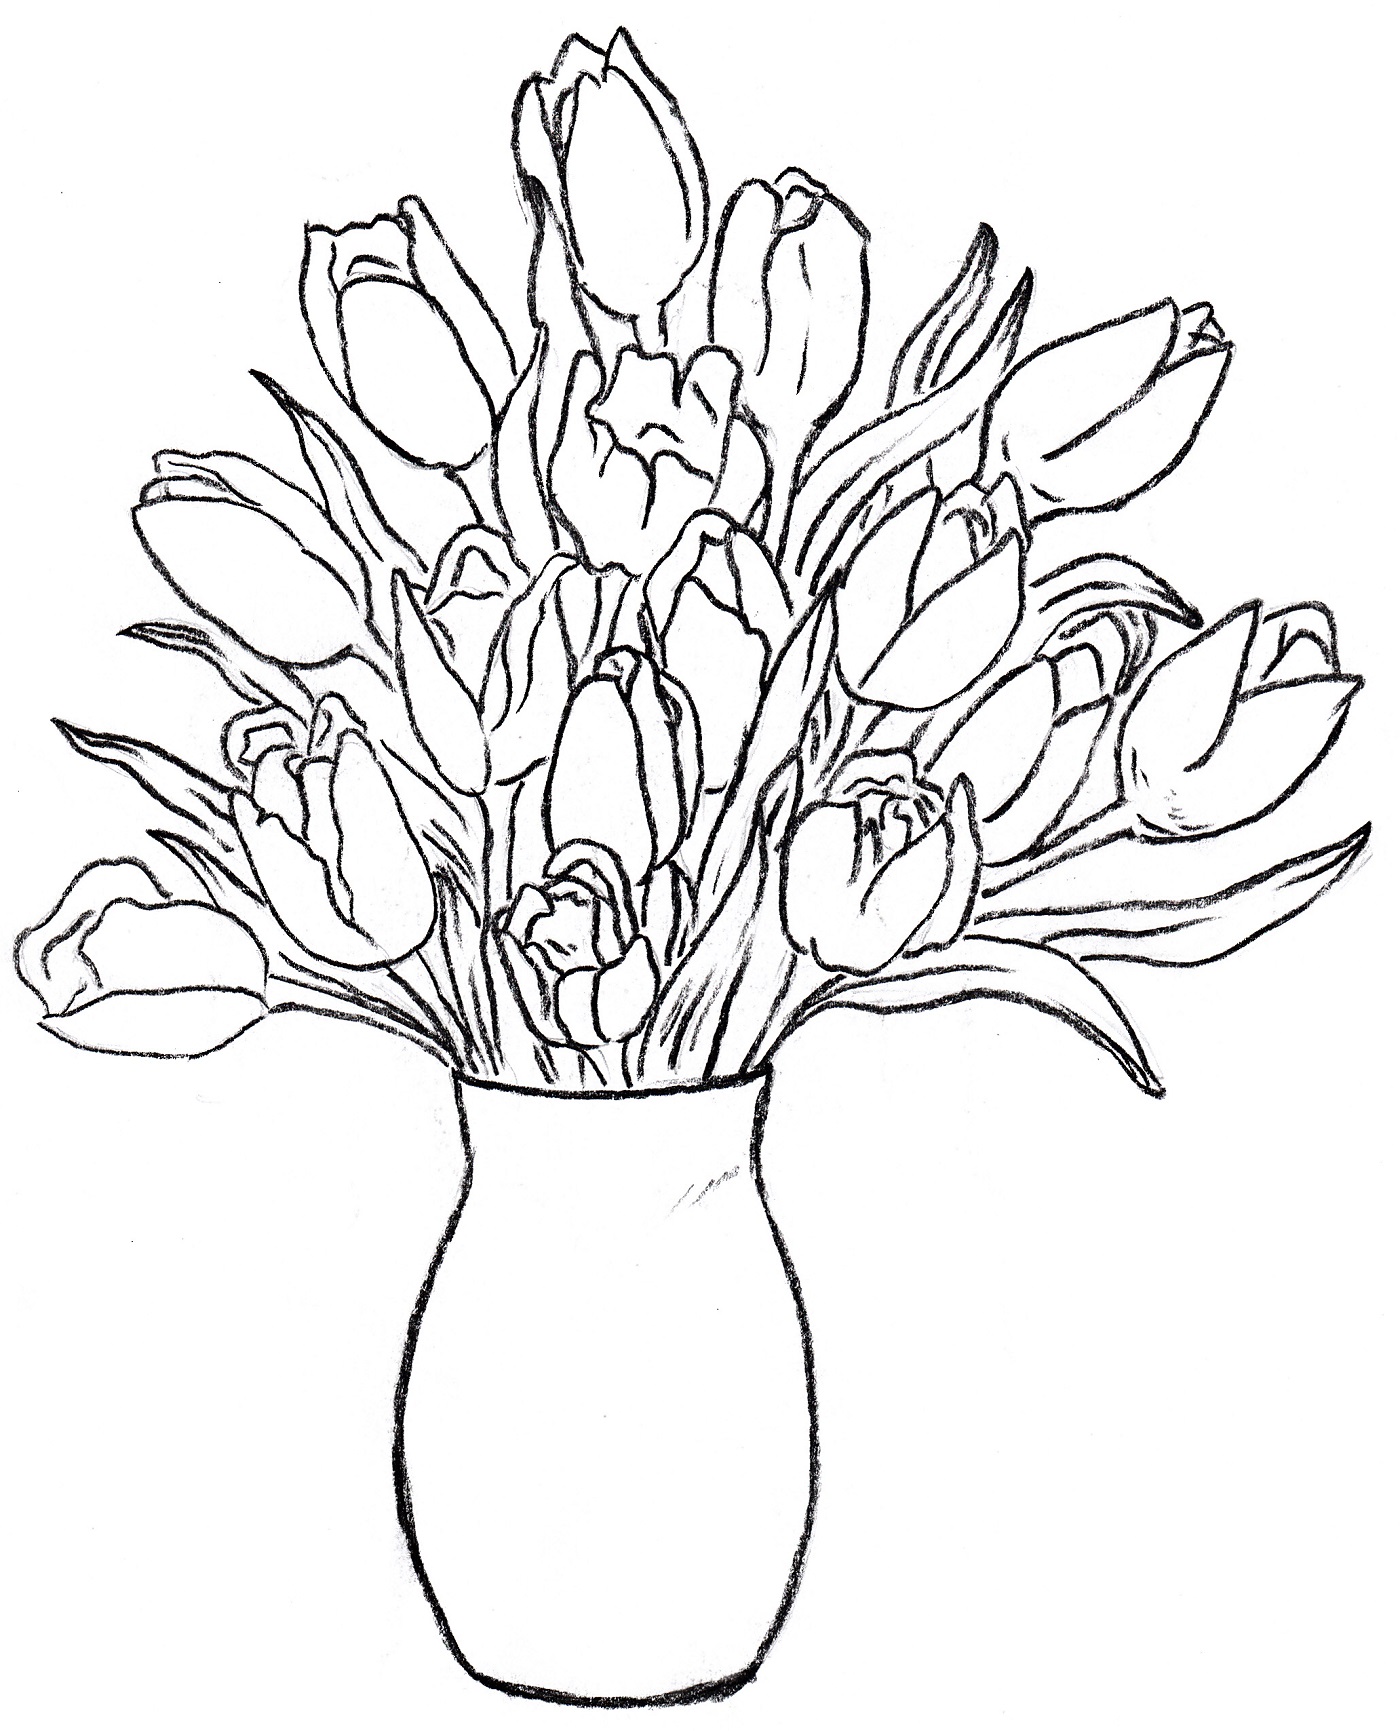 Pencil Flower Vase Drawing Images With Colour - img-sycamore